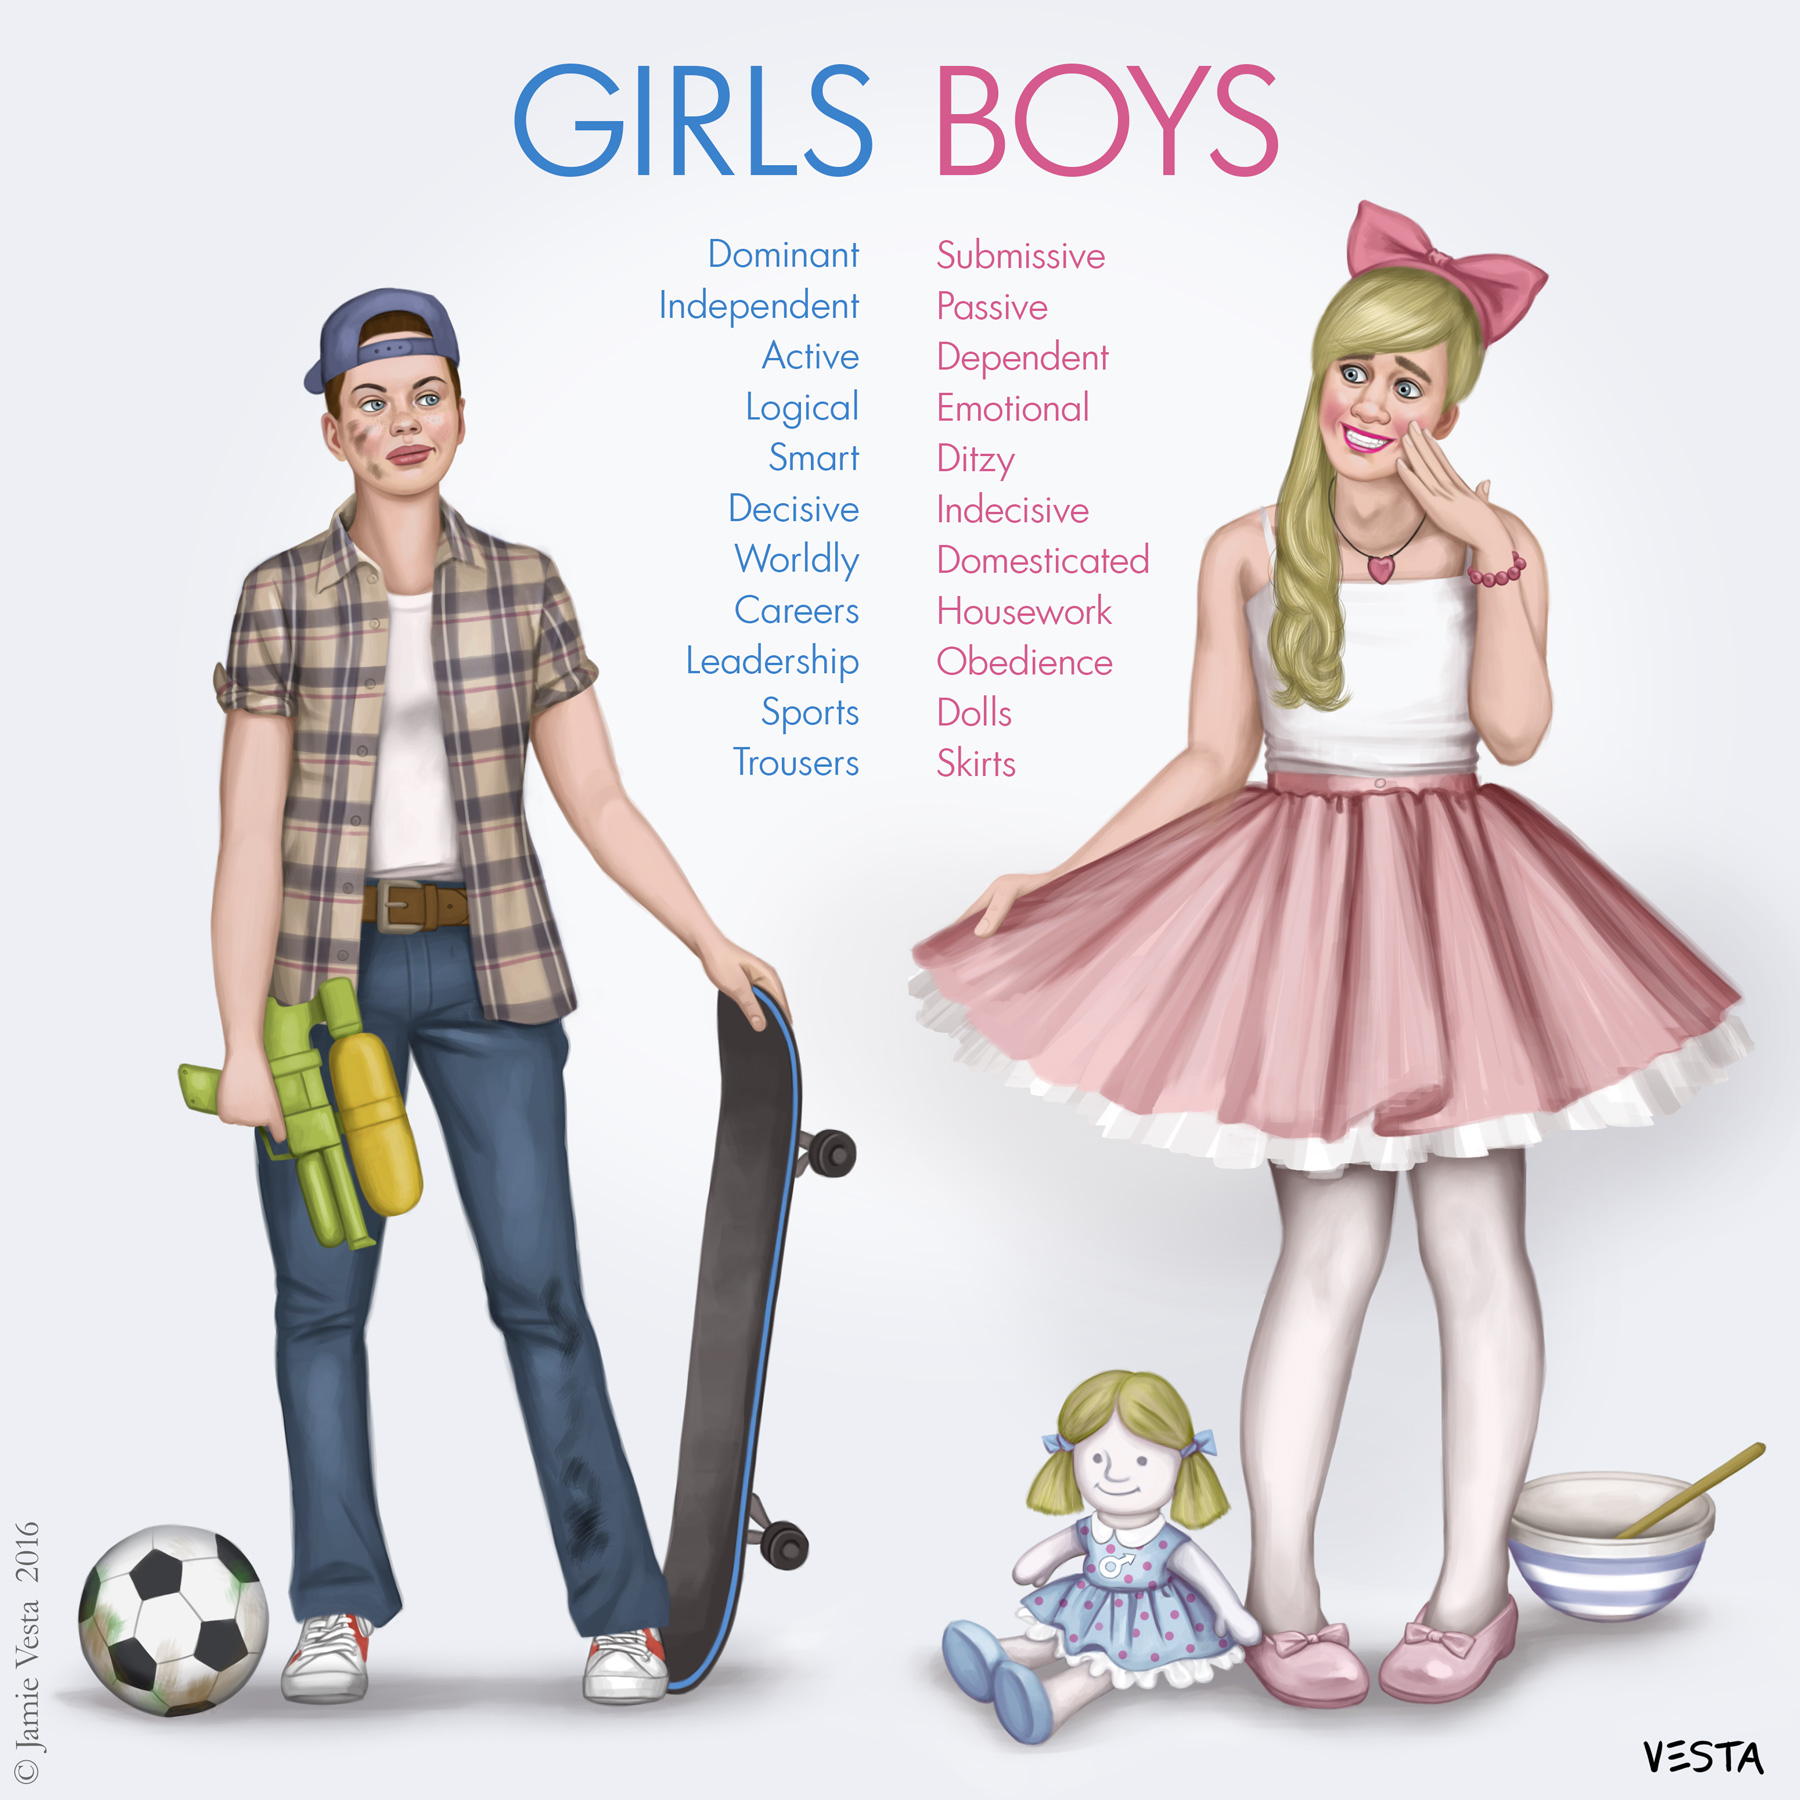 Gender Roles Are Indicators Of A Society